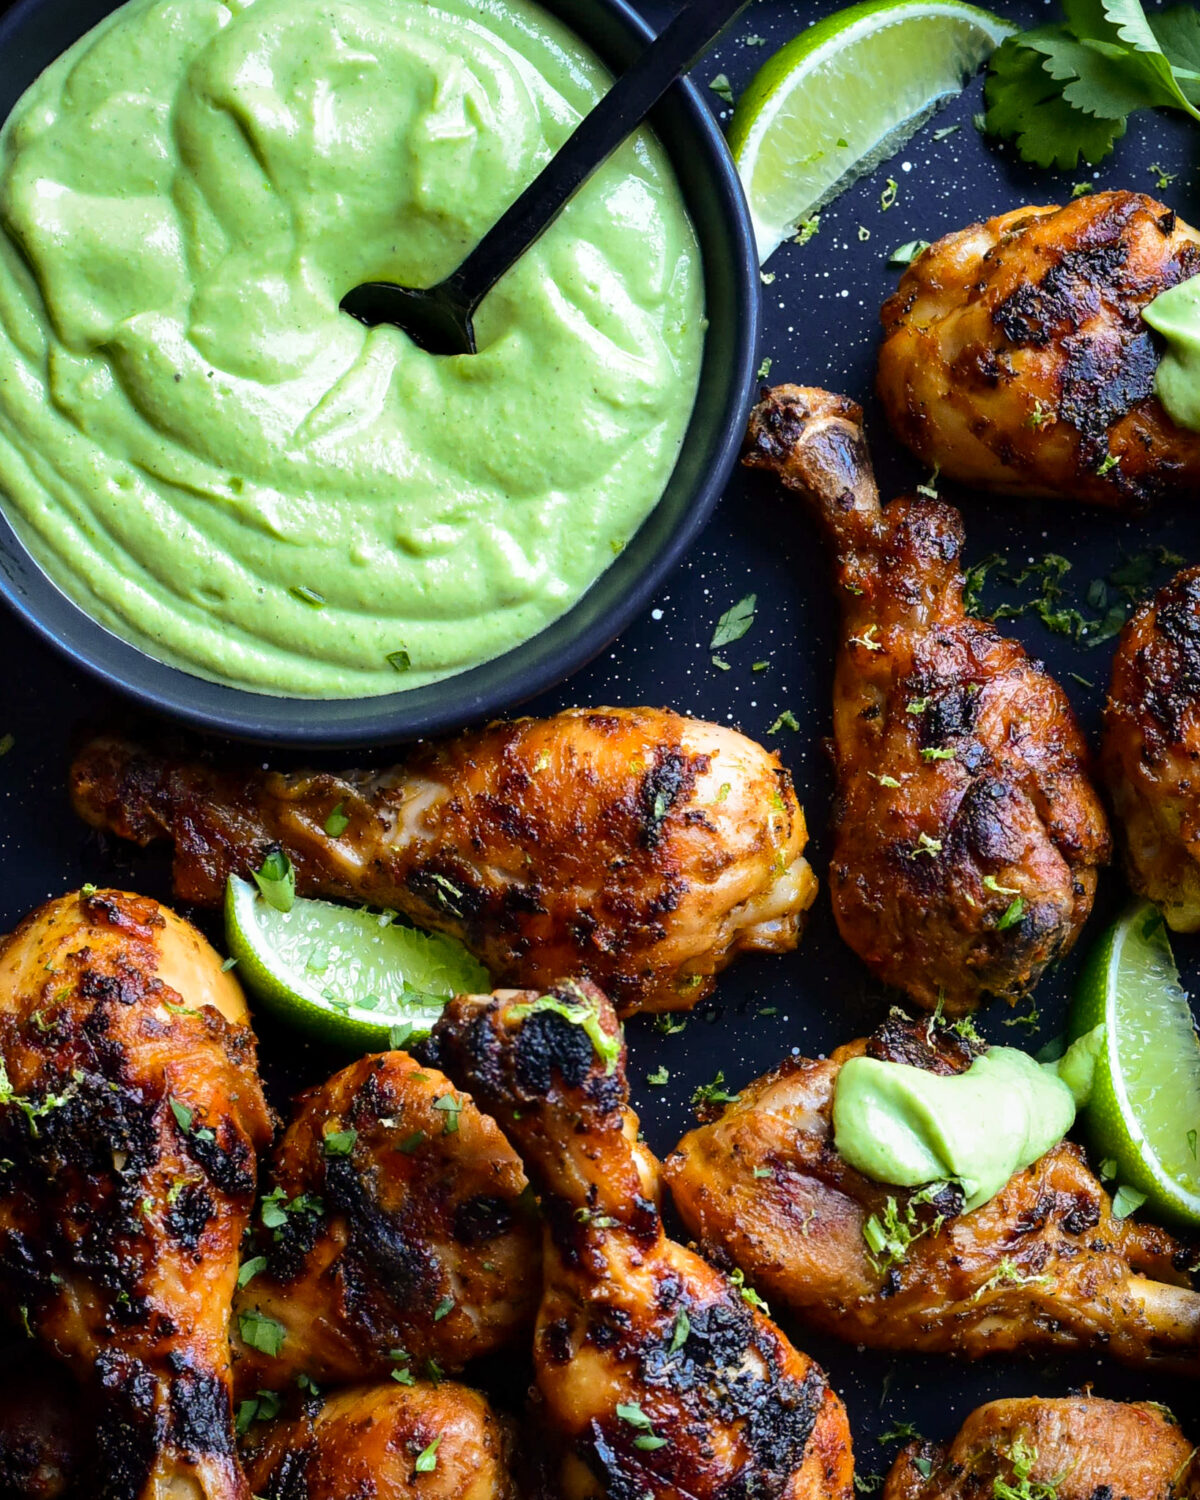 A big bowl of spicy cilantro green sauce served with charred chicken drumsticks and limes.